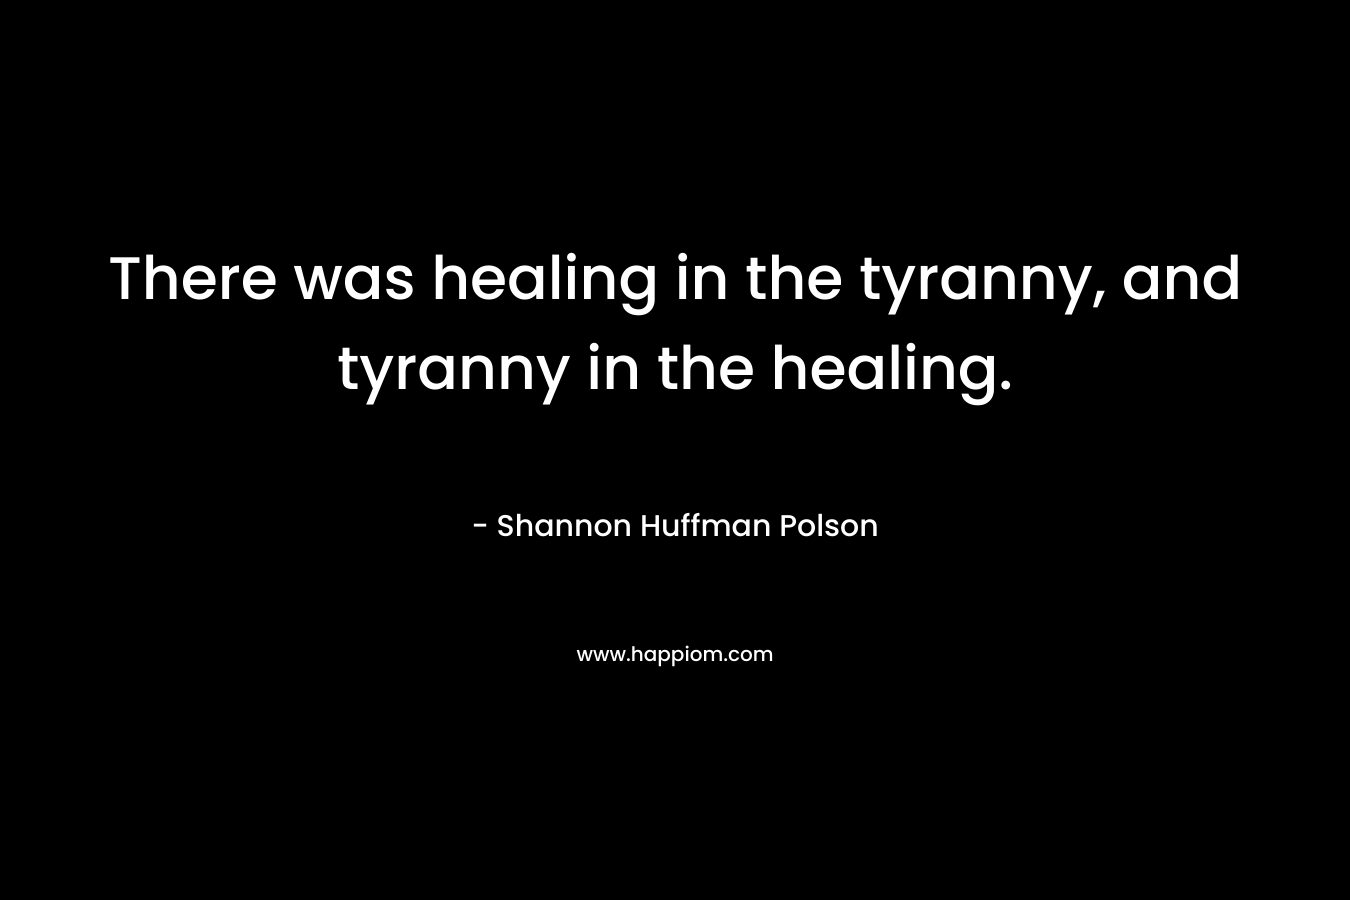 There was healing in the tyranny, and tyranny in the healing.